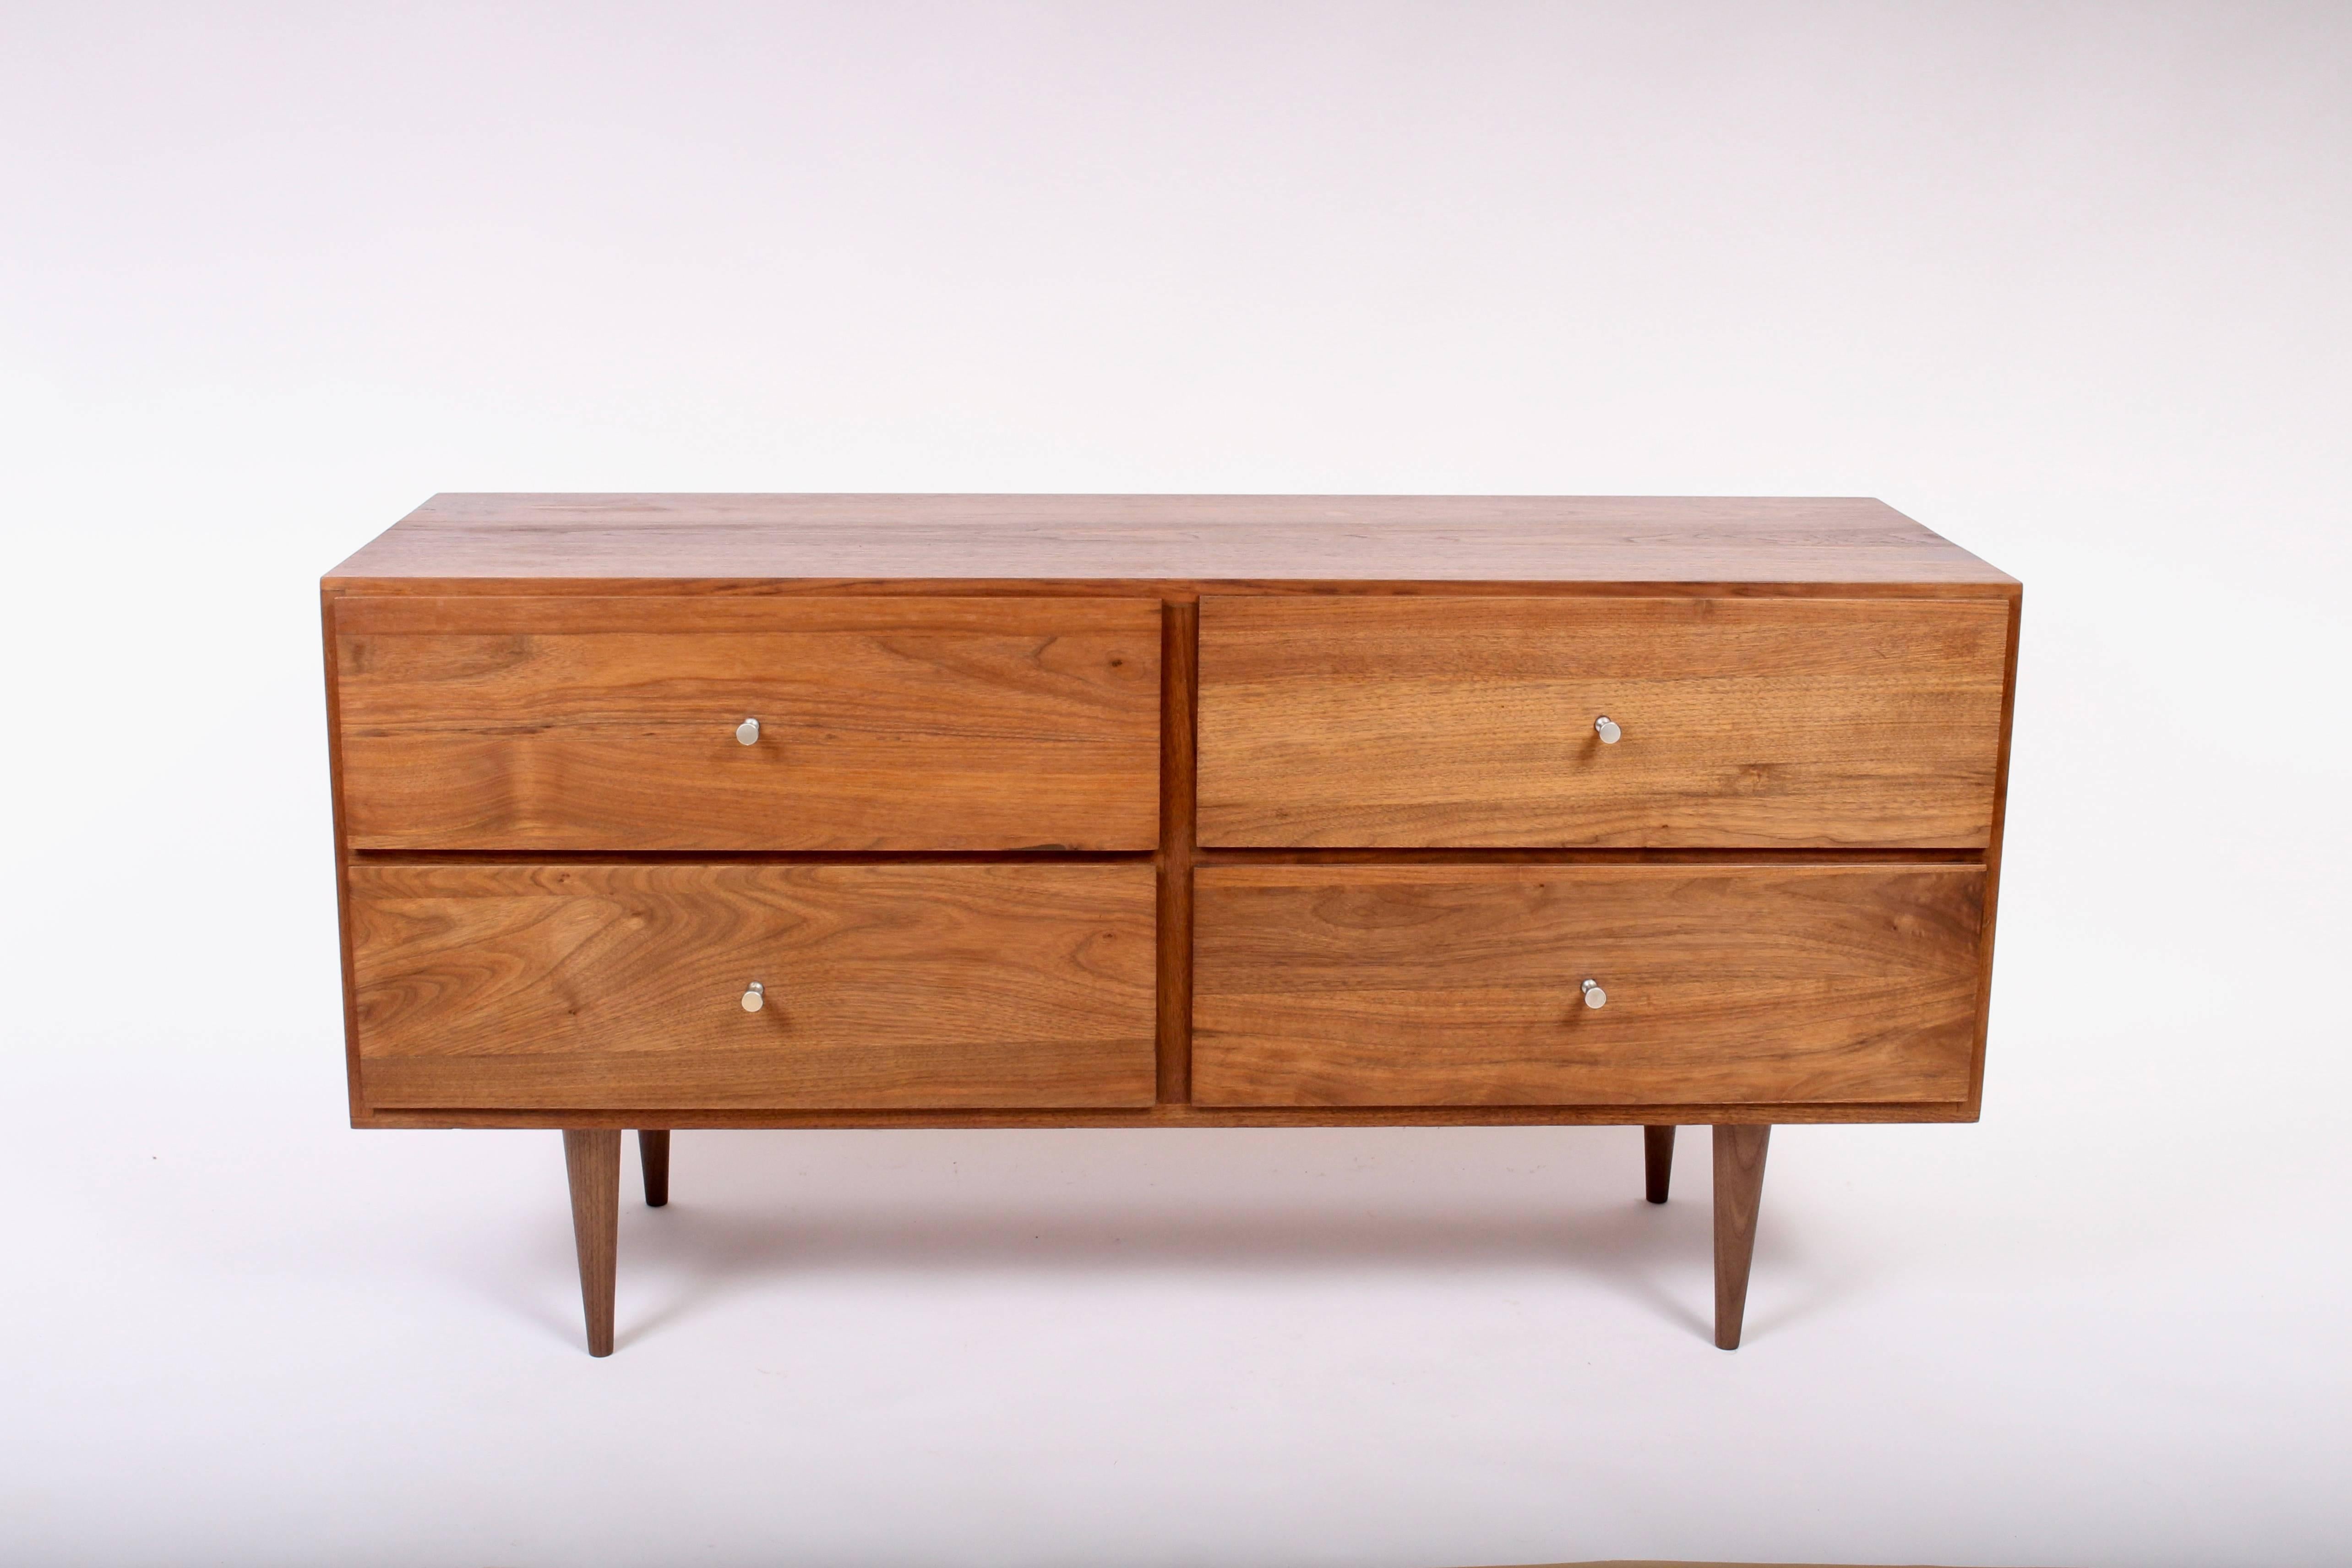 American Mid-Century Modern Four-drawer solid Black Walnut Nightstand or low Dresser by Paul McCobb. Can be utilized as modular furniture. Stackable, legs removable. Versatile. Nightstands. Bedside. Side tables. Excellent storage. Classic Nickel